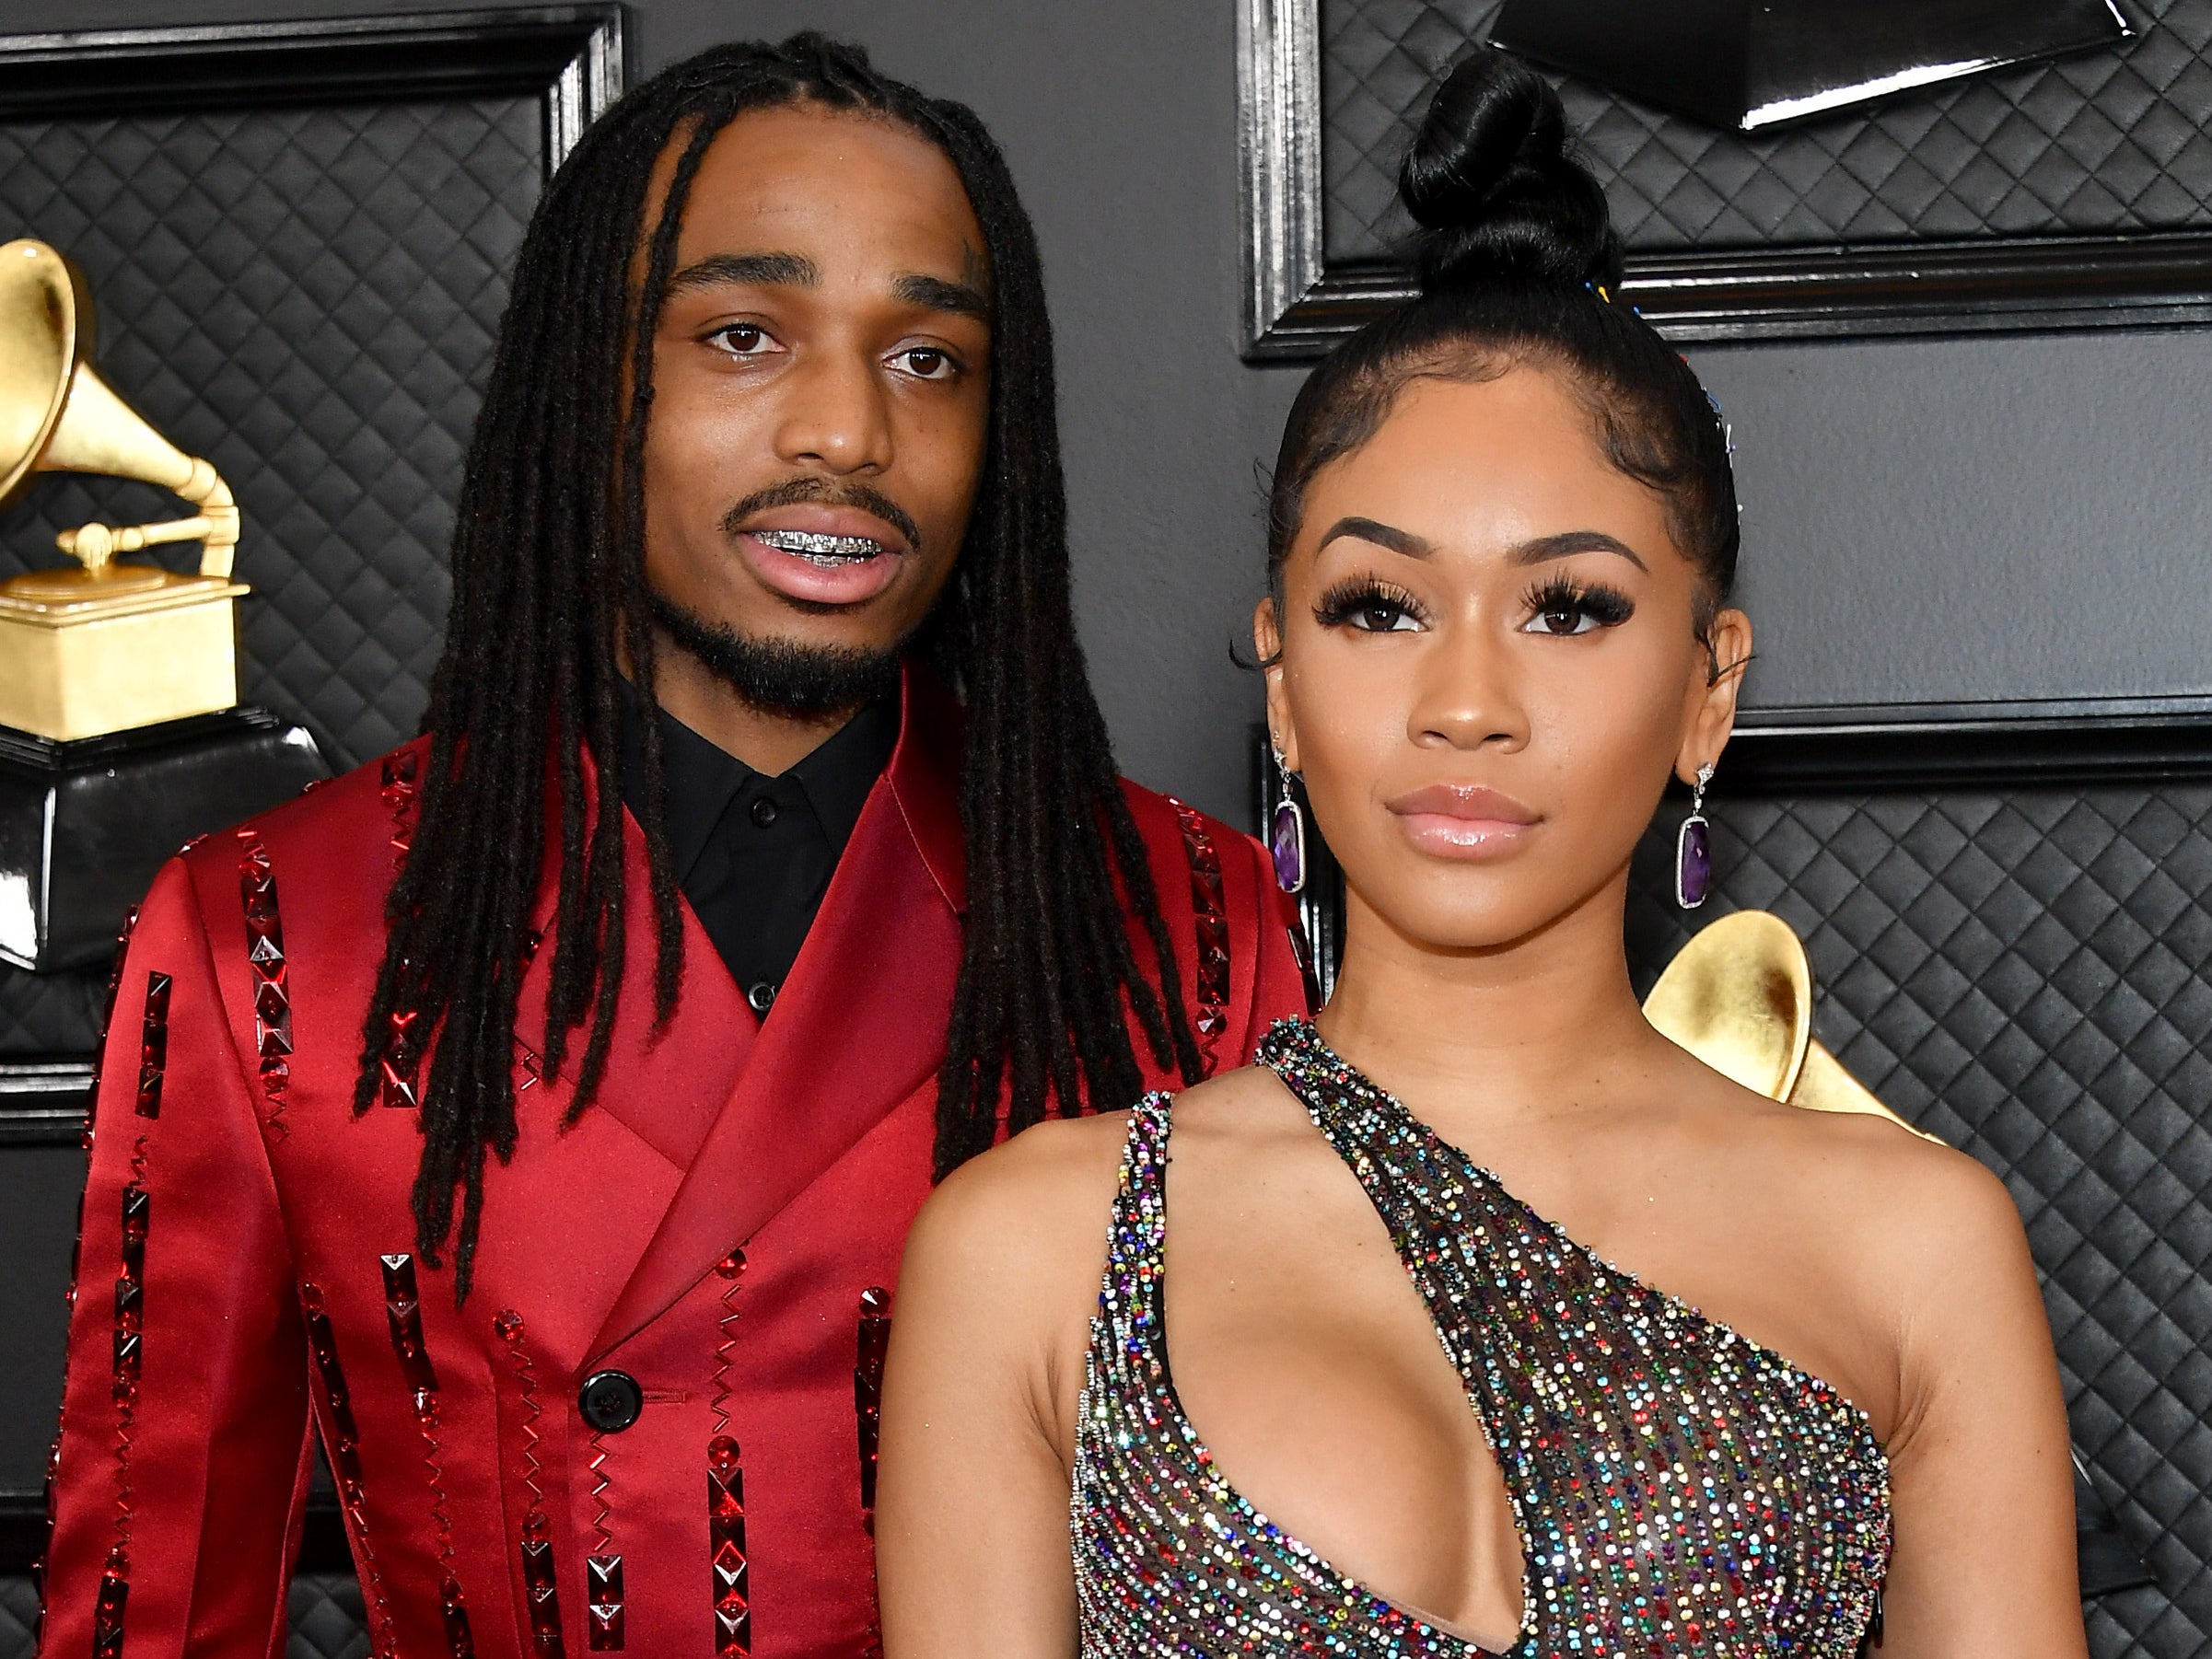 Quavo and Saweetie at the 2020 Grammy Awards